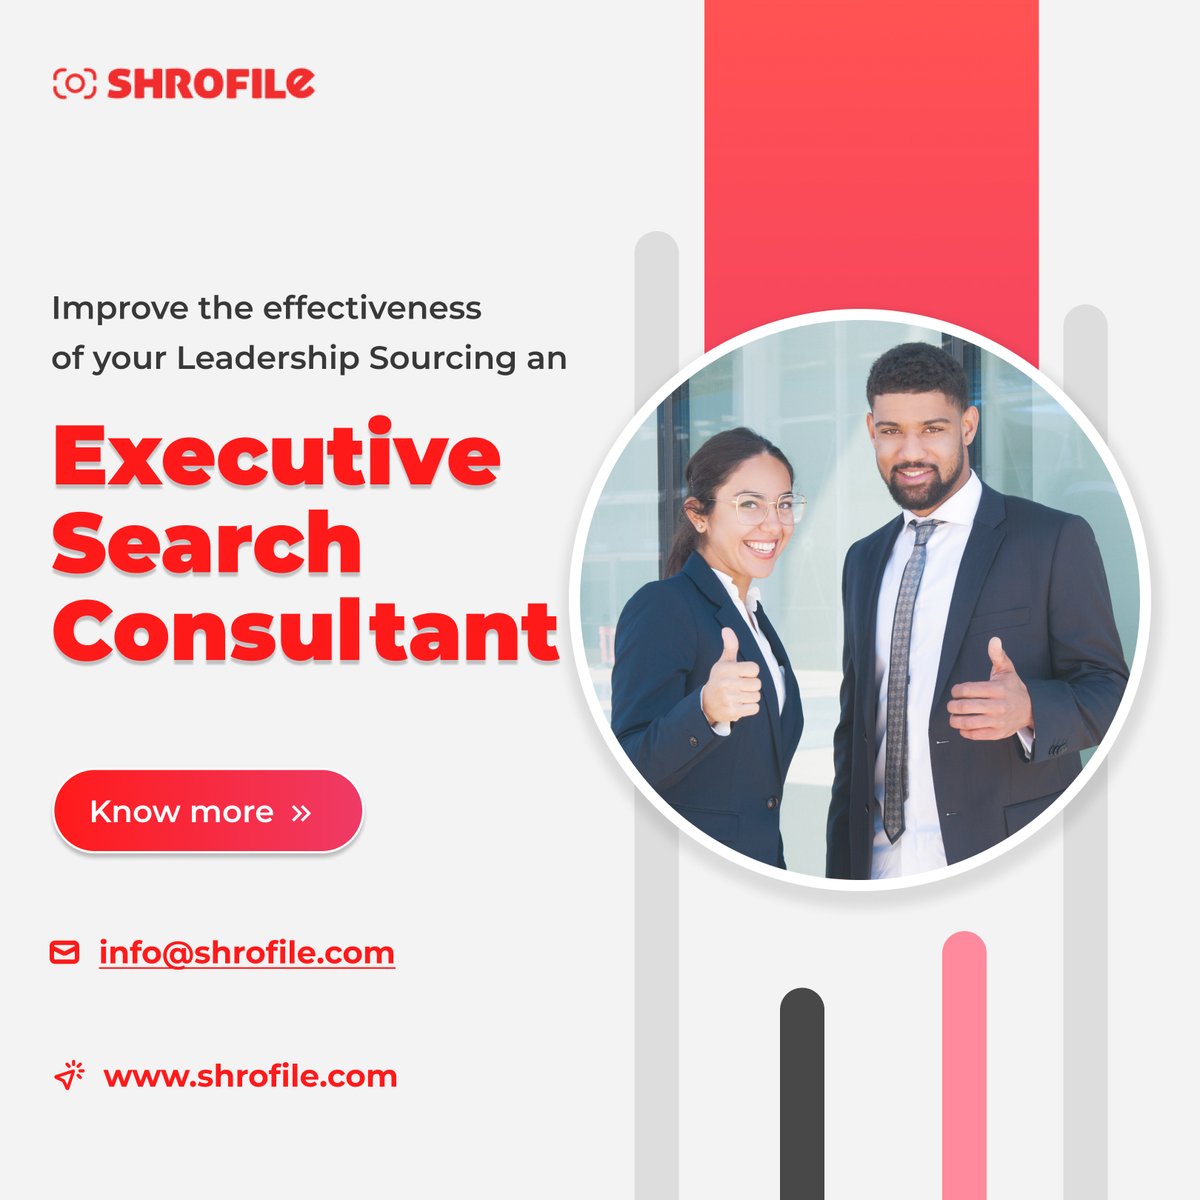 Improve the effectiveness of your Leadership Sourcing an executive search consultant.

Know more ~ shrofile.com/executive-sear…
Email - info@shrofile.com

#executivesearch #leadership #hiring #CTO #CXO #HR #hrconsultant #hrconsultancy #recruitment #recruitmentagency #Shrofile